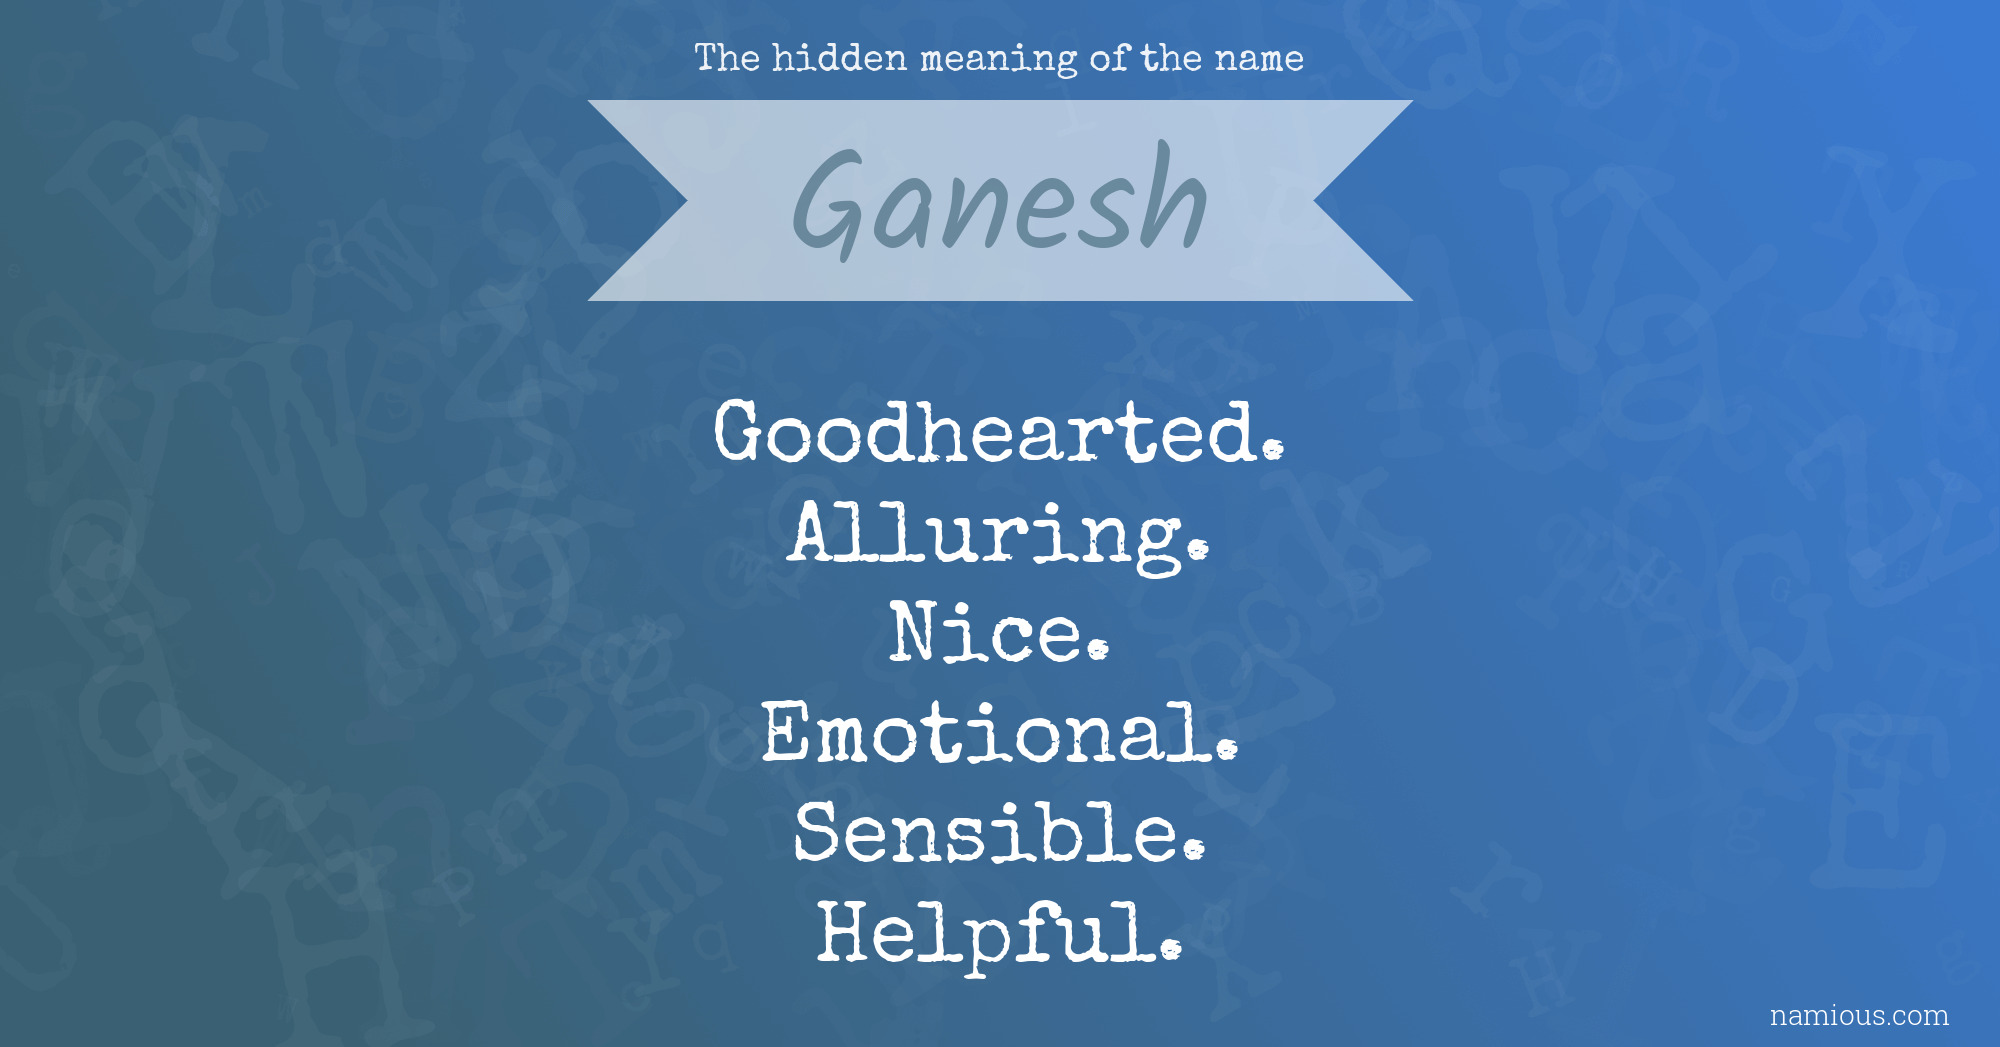 The hidden meaning of the name Ganesh